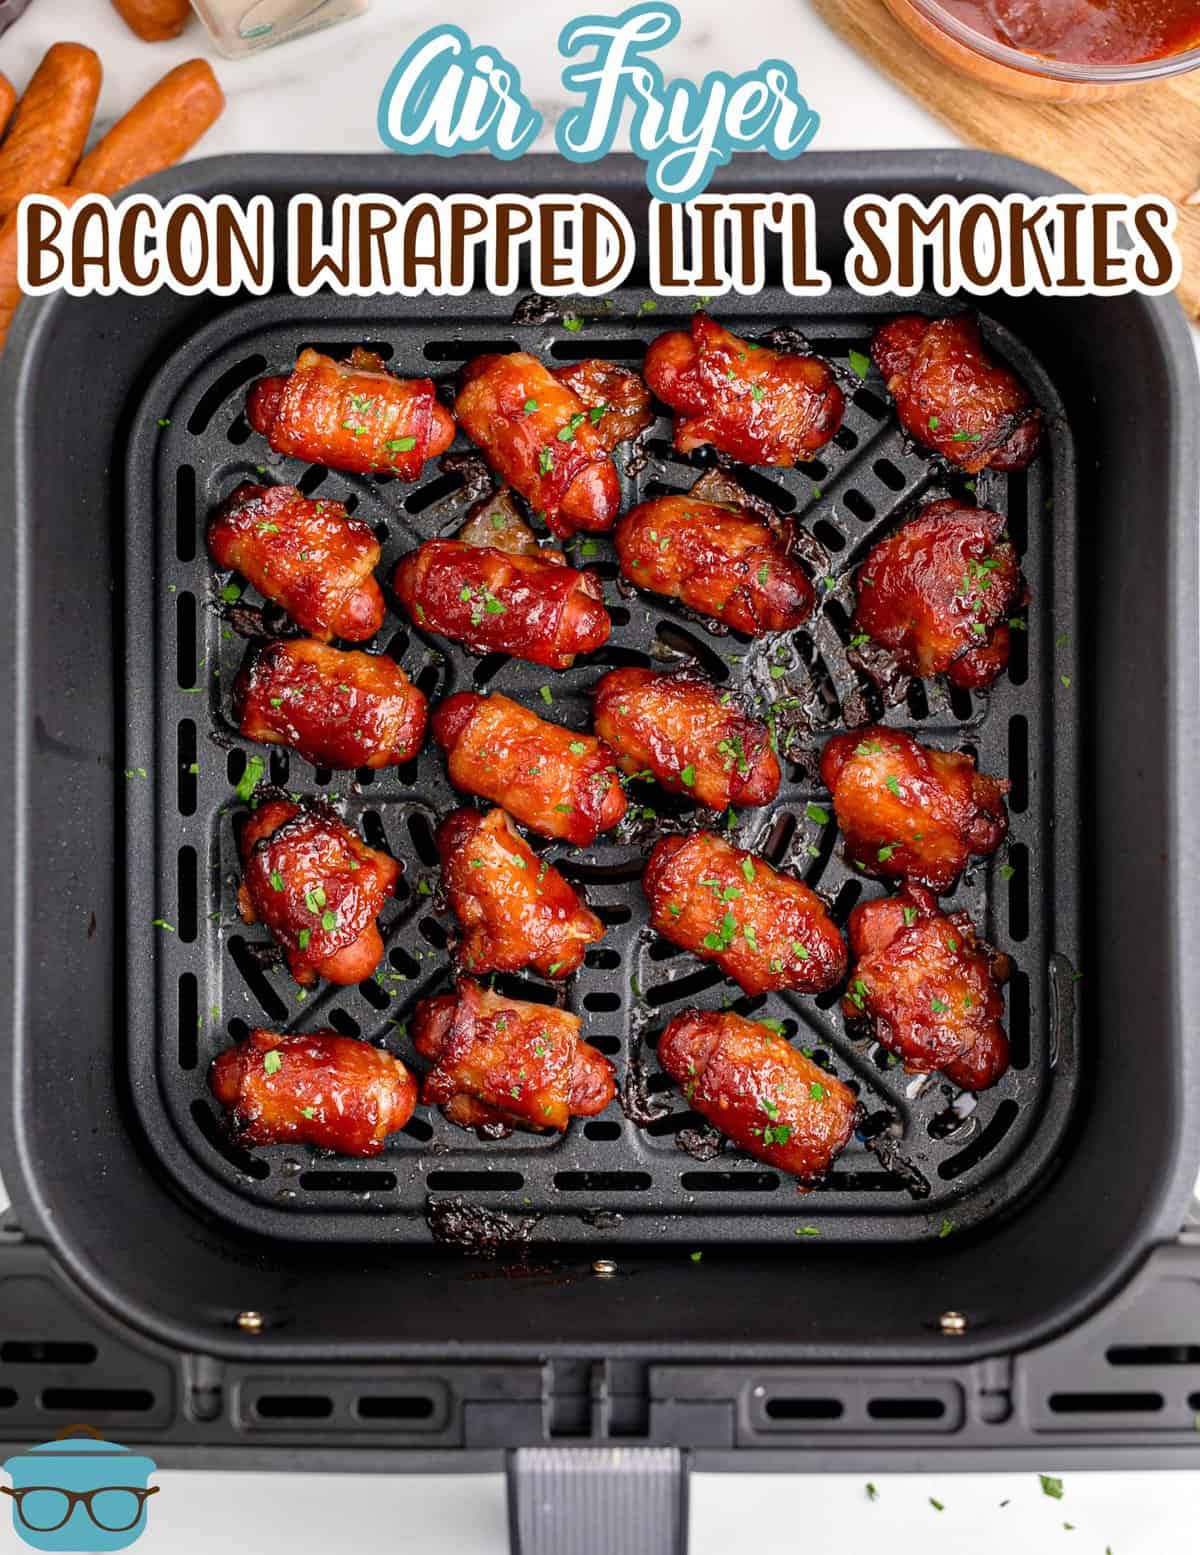 fully cooked bacon wrapped little smokies shown in an air fryer basket.